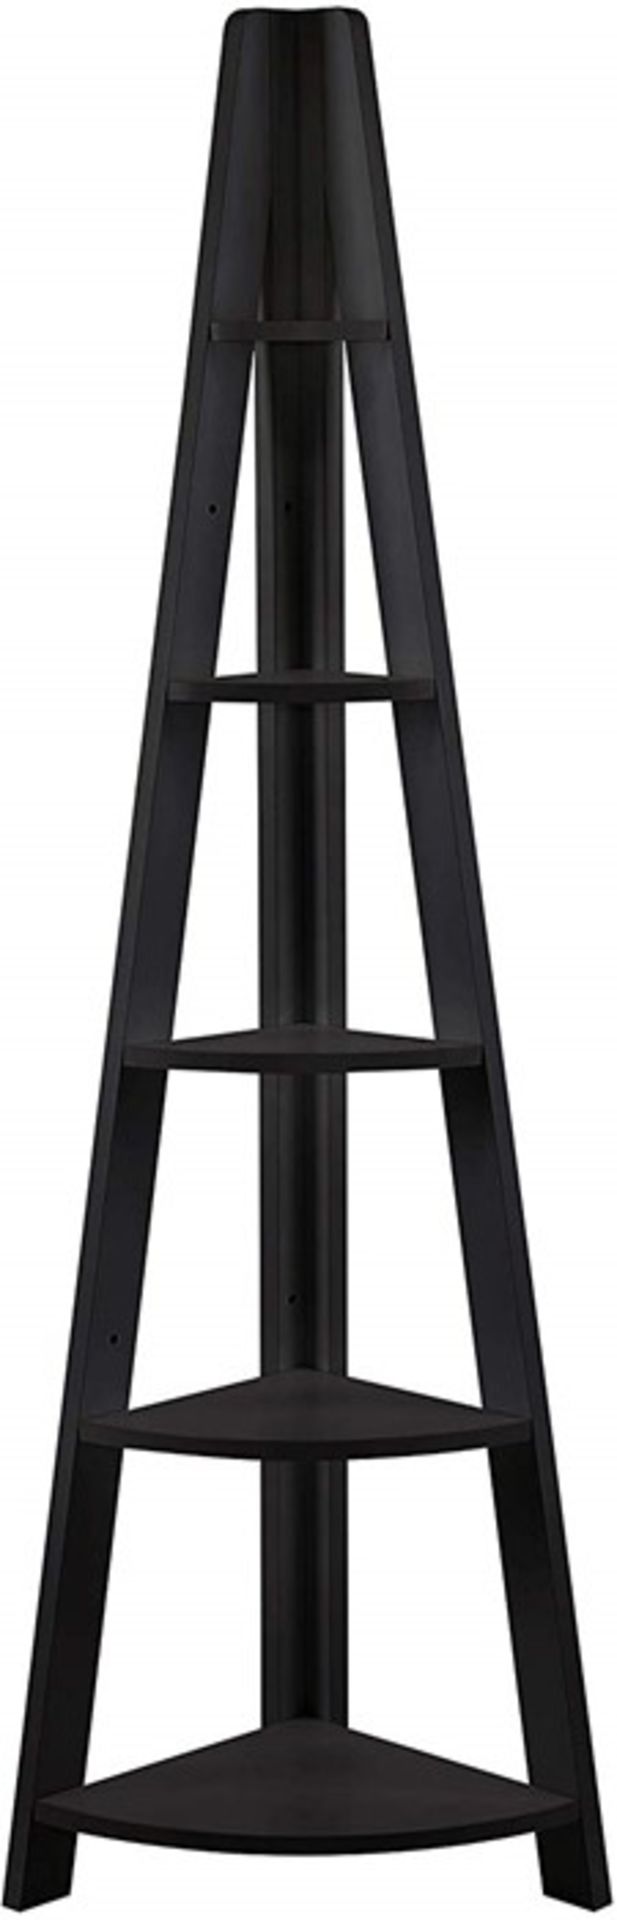 1 BOXED TIVA CORNER LADDER SHELVING IN BLACK - TIVABLACOR / RRP £82.99 (PUBLIC VIEWING AVAILABLE)